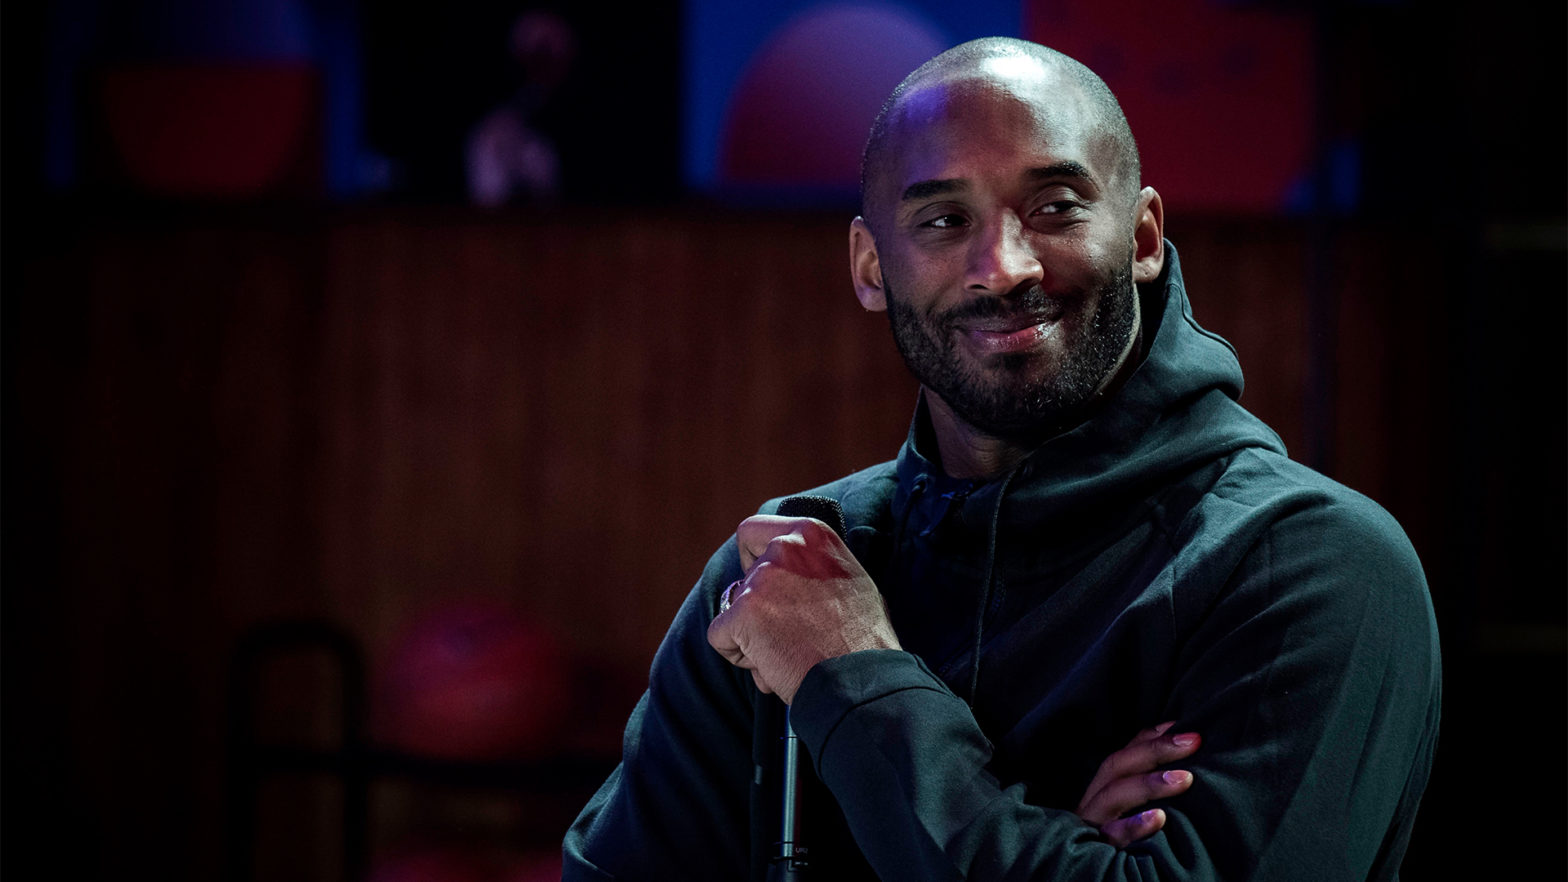 Kobe Bryant's Estate Resumes Its Partnership With Nike Under New Long-Term Deal